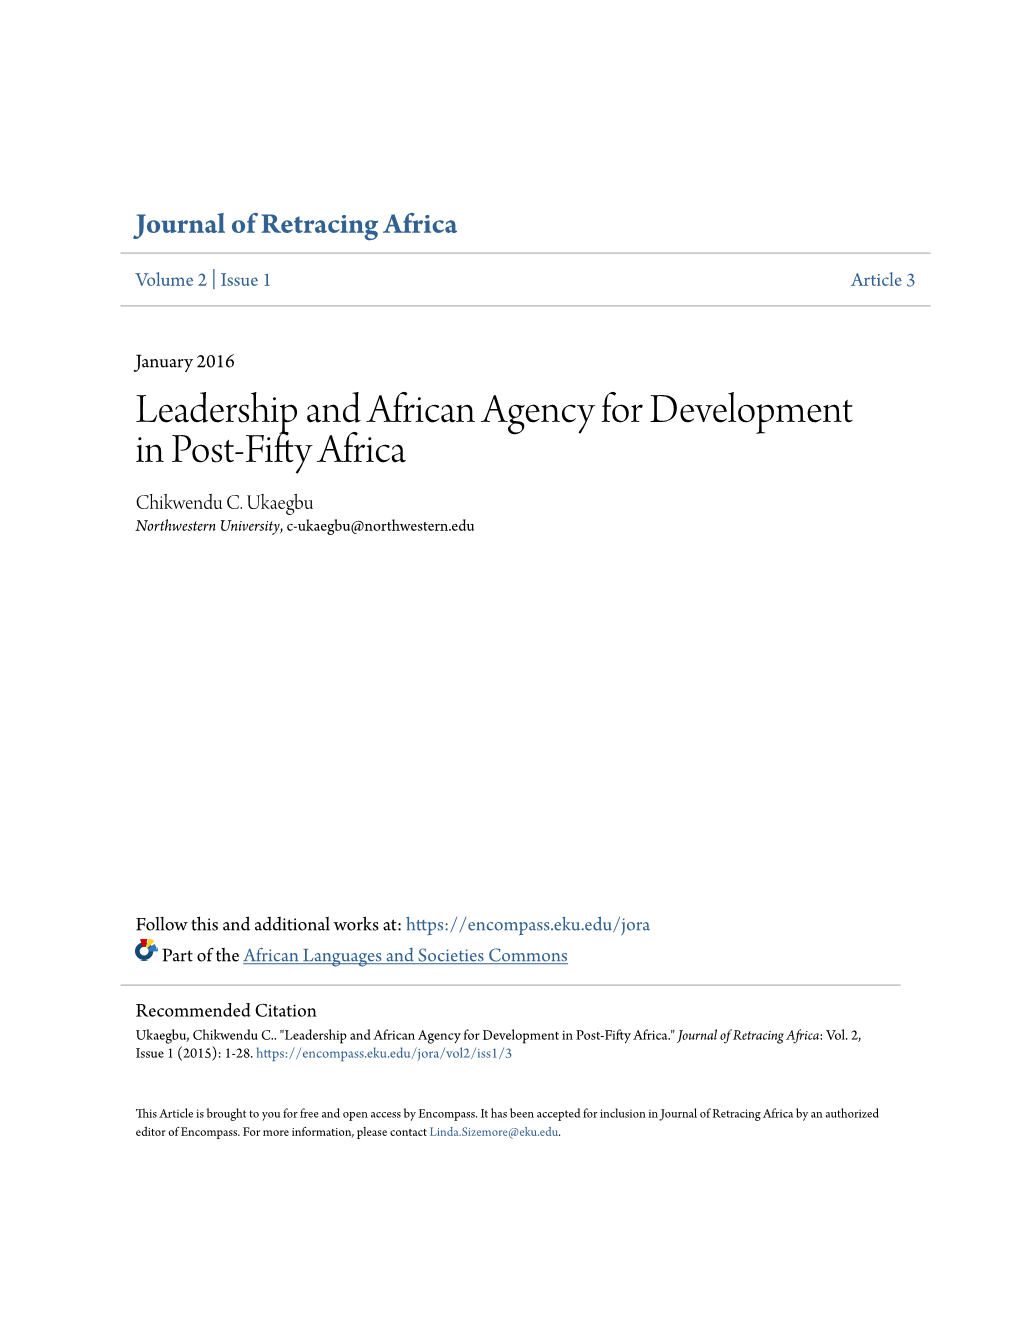 Leadership and African Agency for Development in Post-Fifty Africa Chikwendu C